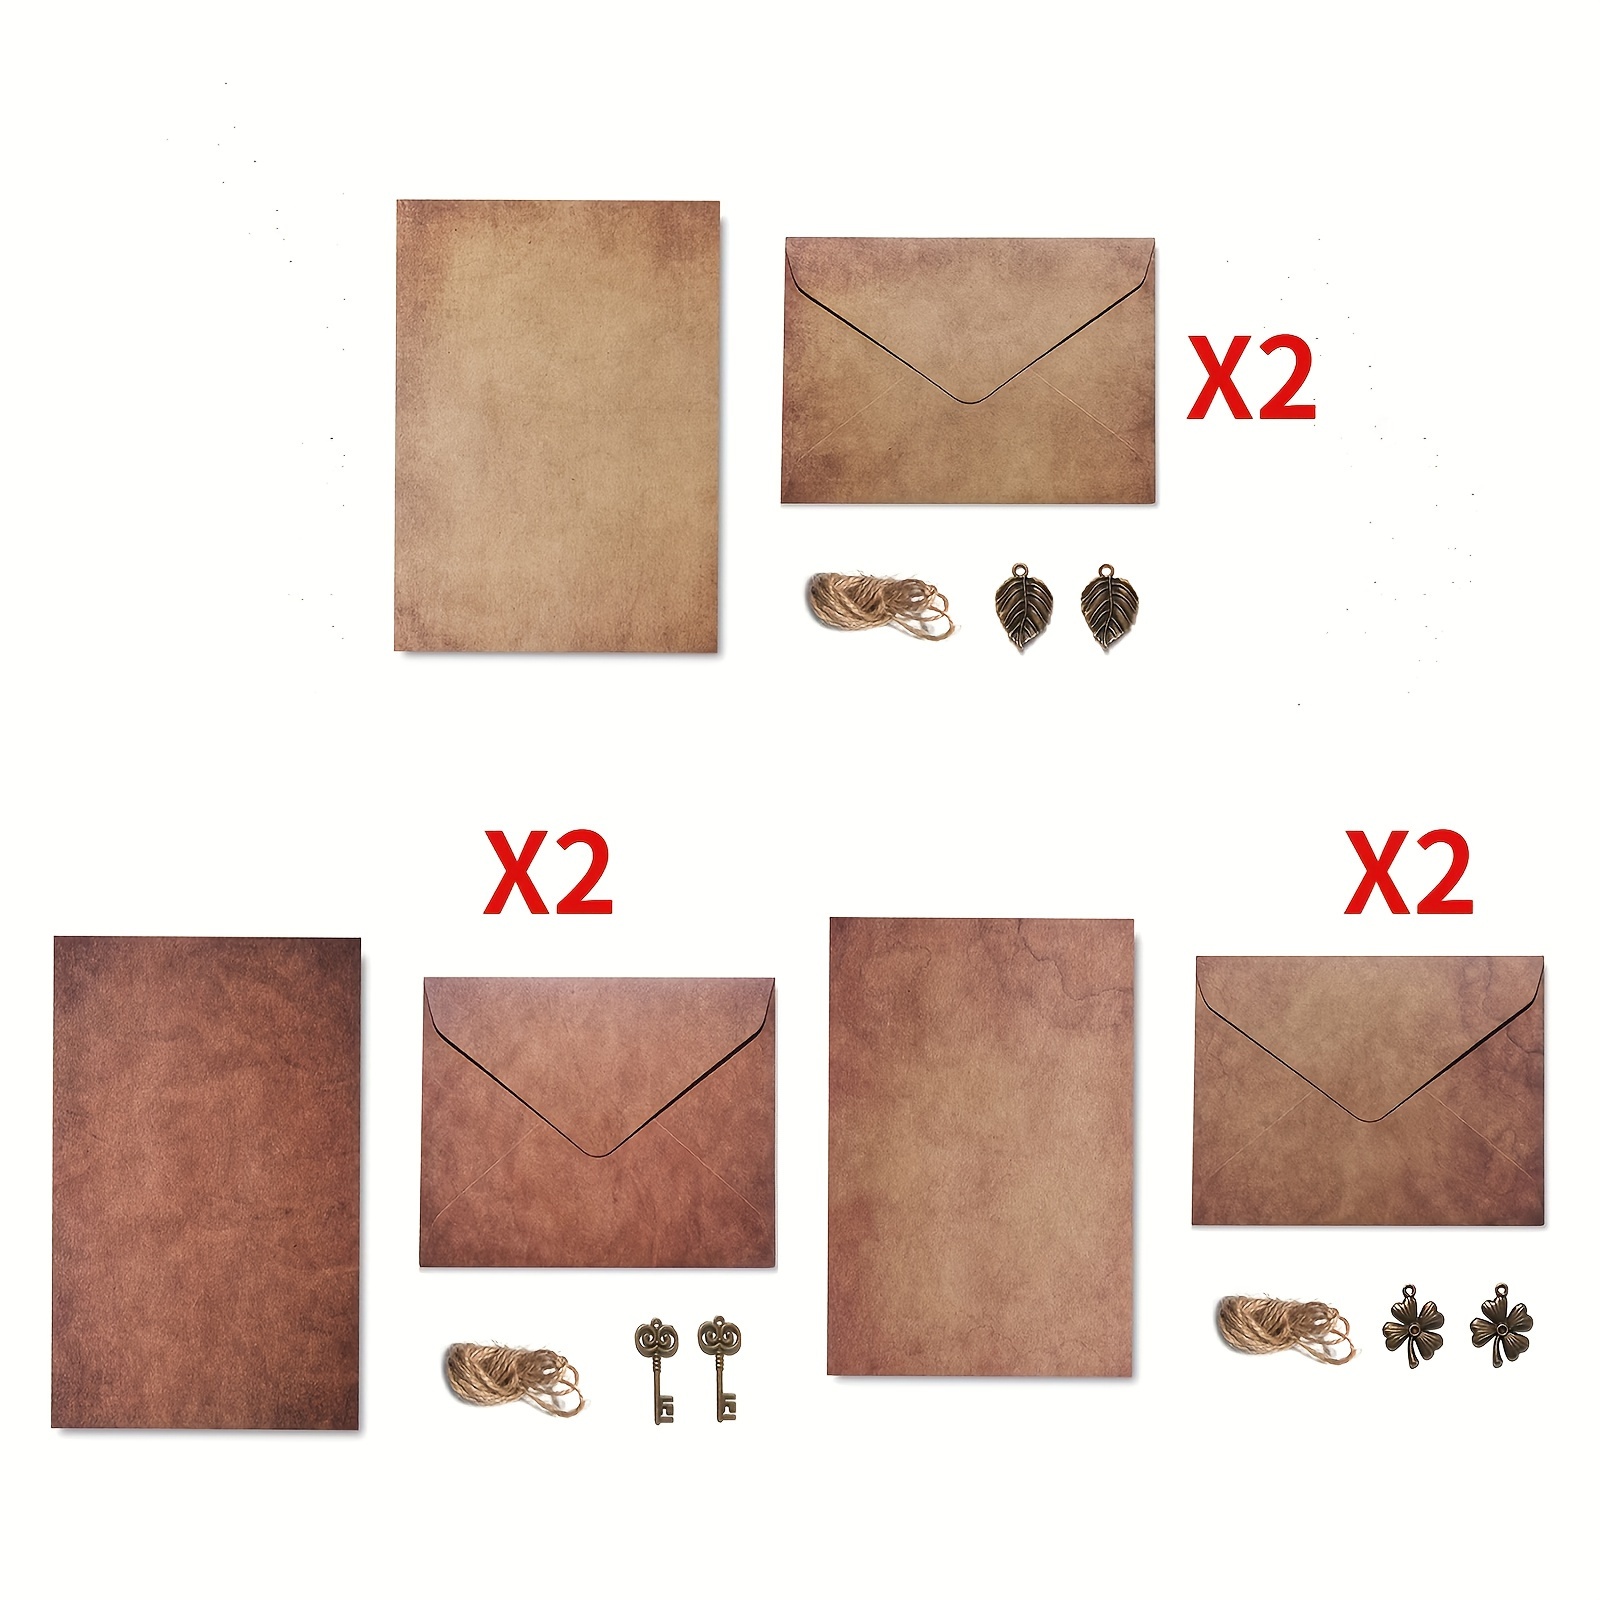  Tofficu 1 Set Envelope Letter Paper Vellum Envelopes Vintage  Paper Fresh Writing Paper Gift Card Envelopes Stationery Paper Letter Paper  120g Kraft Paper Student Horizontal Grid Toolkit : Office Products